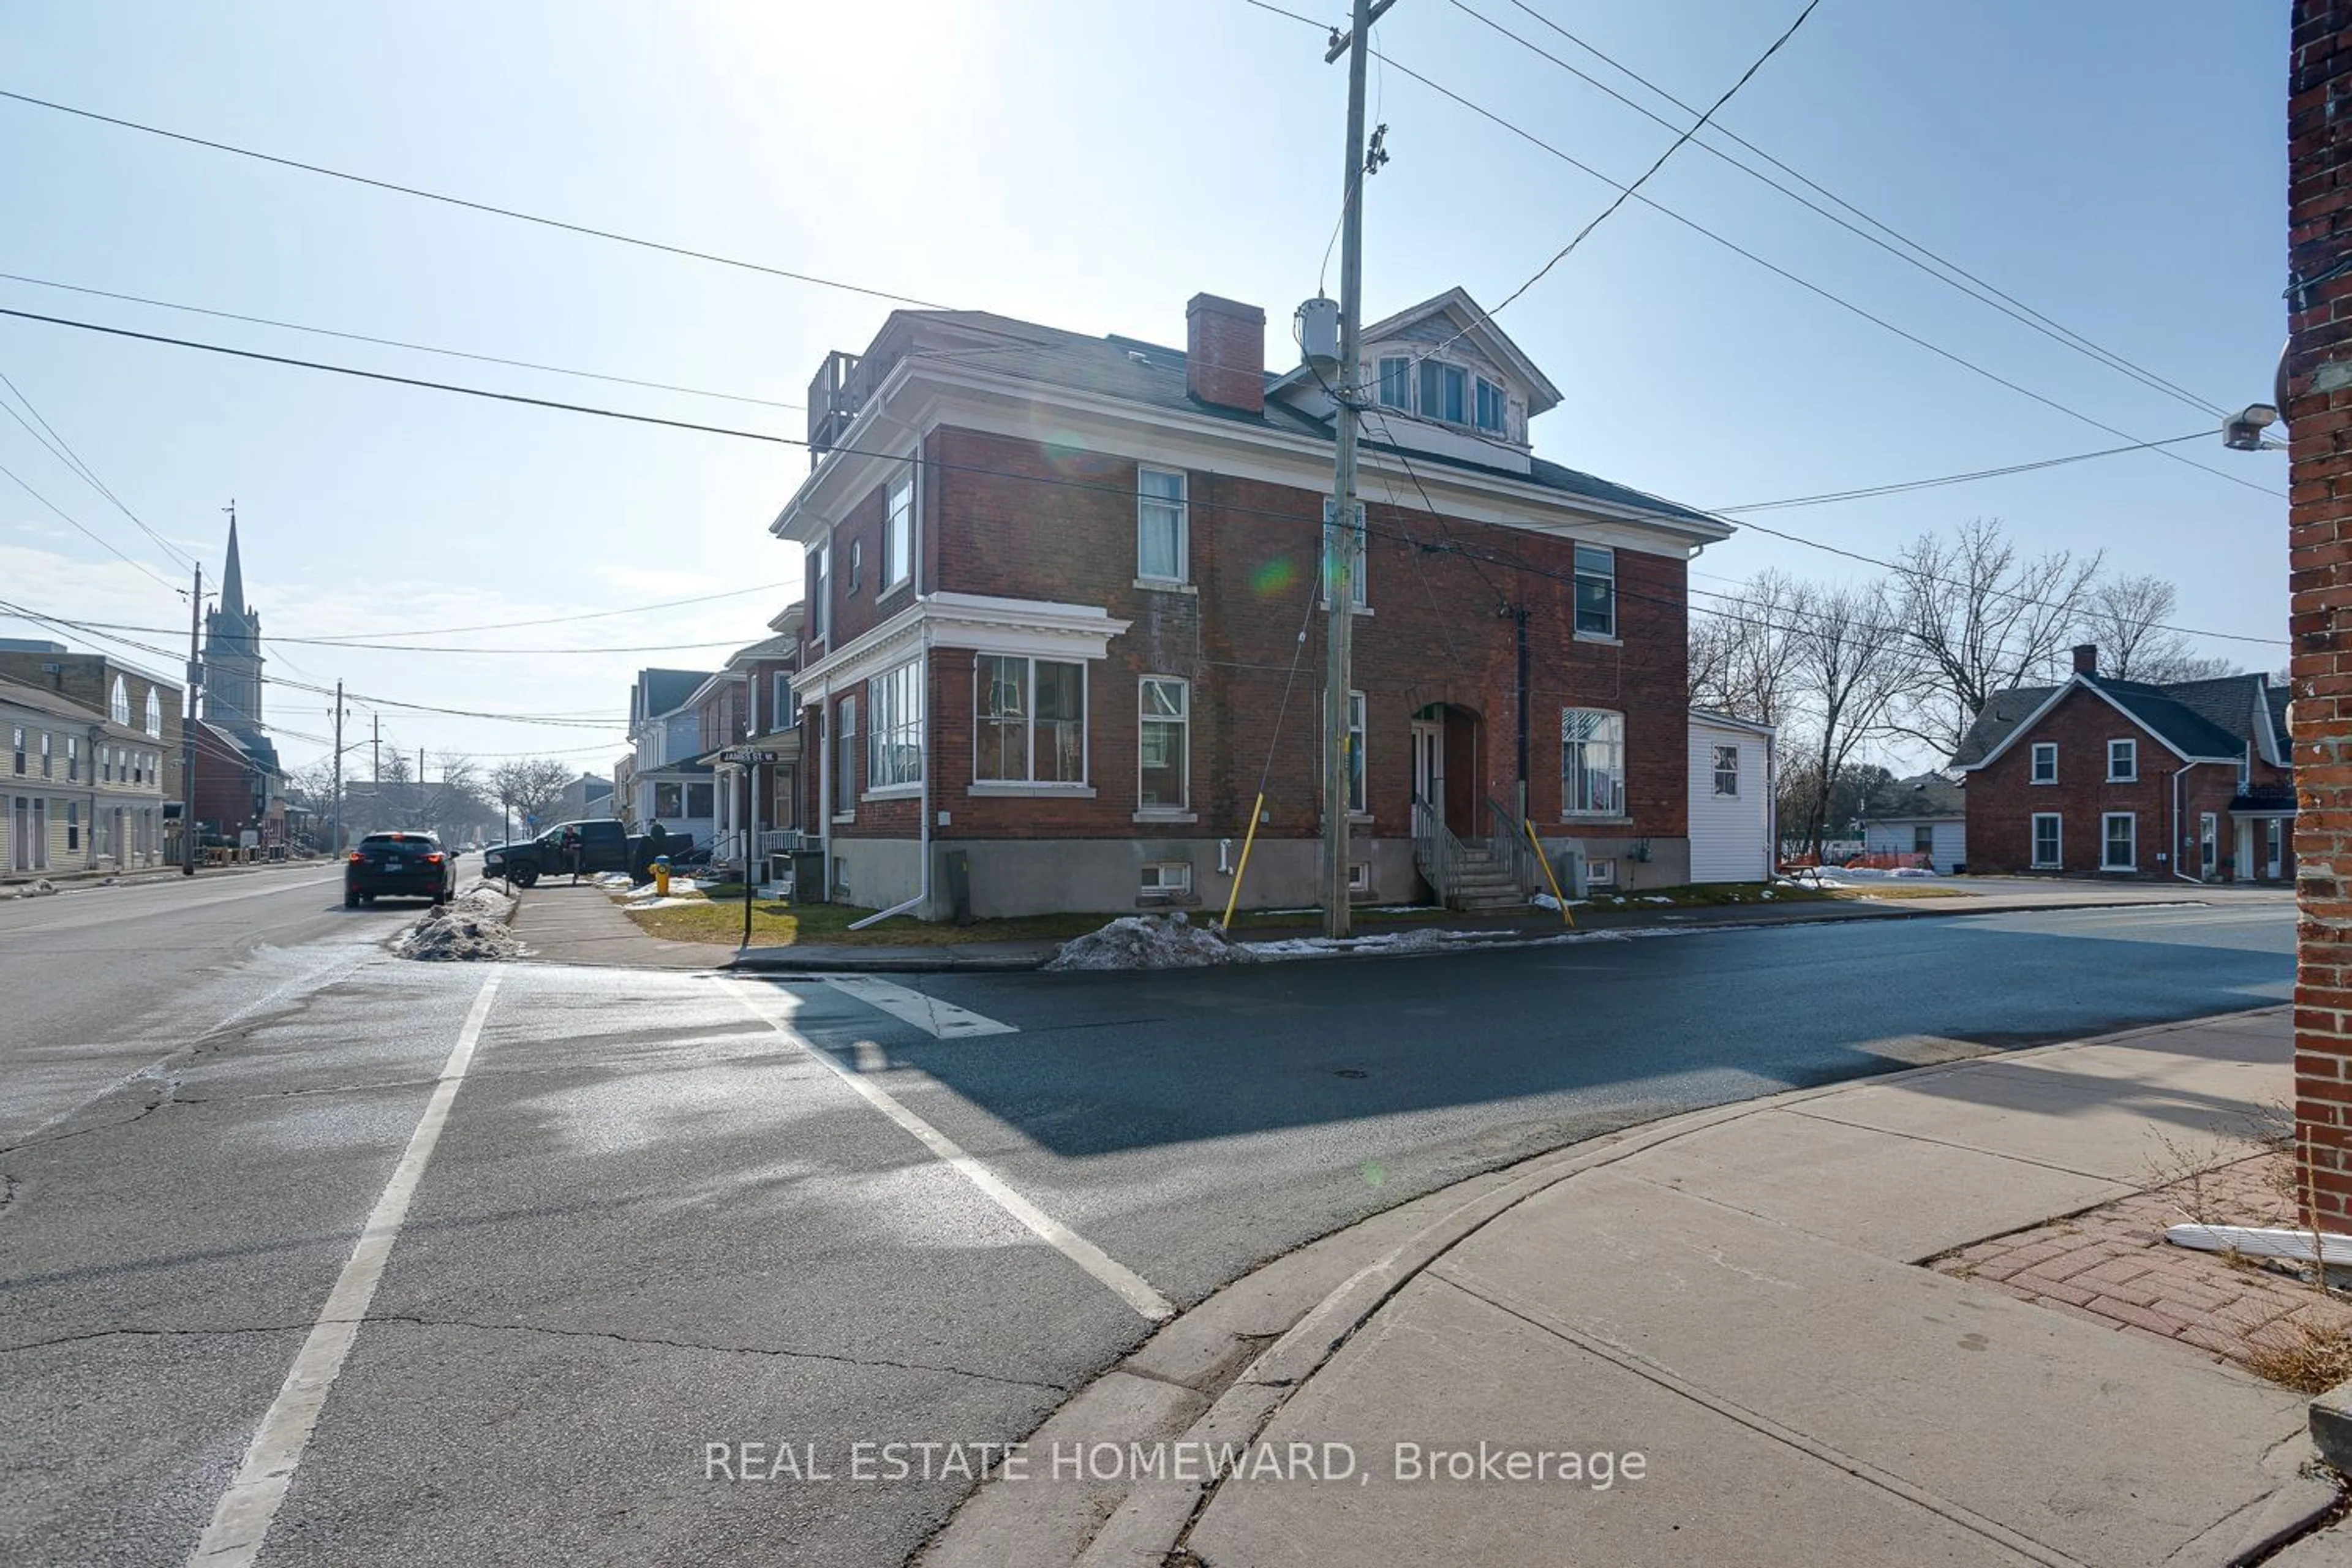 Street view for 1 James St, Cobourg Ontario K9A 2J8